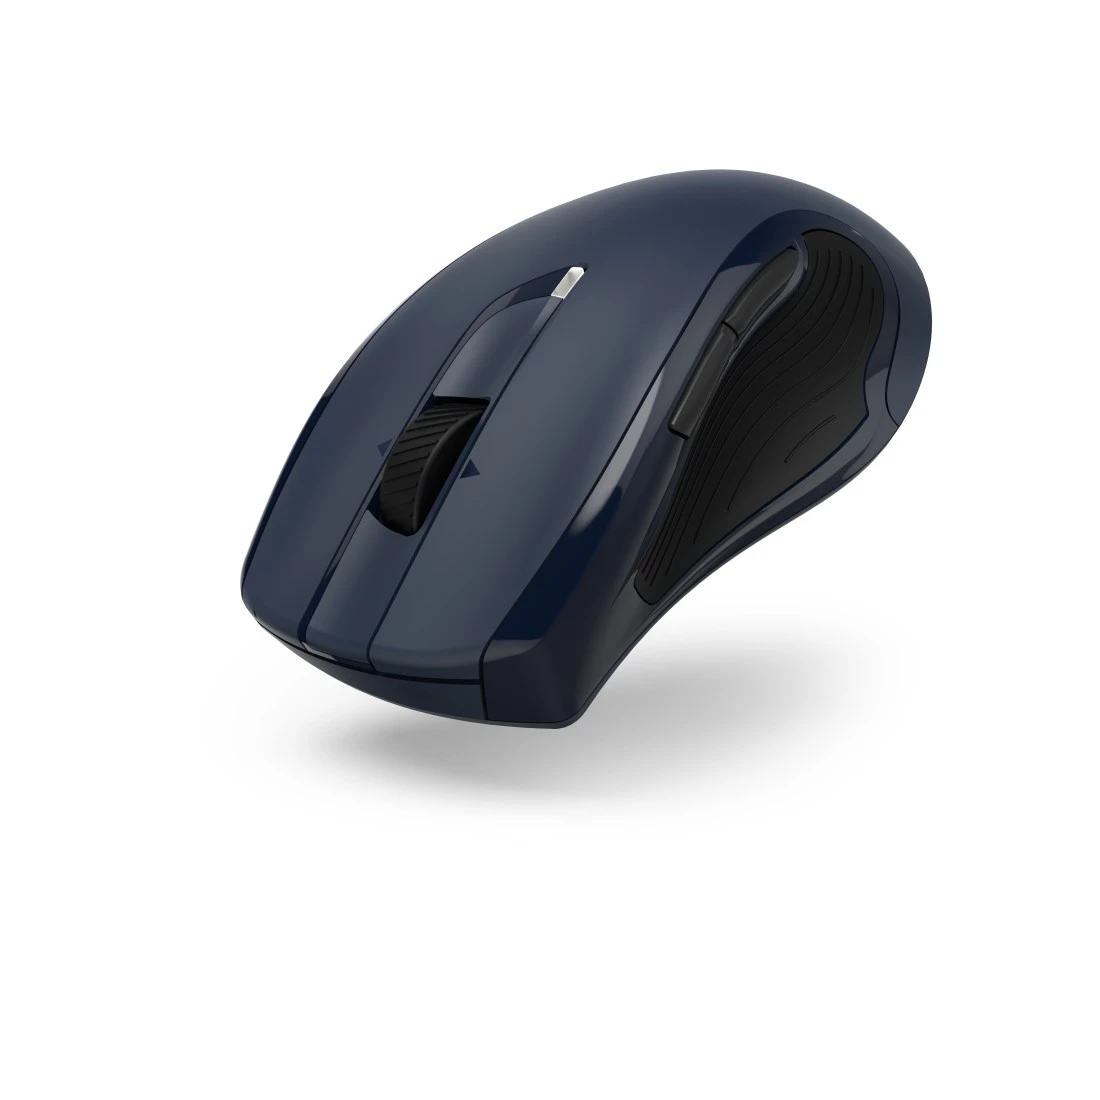 You Recently Viewed Hama 00173017 MW-900 V2 7-Button Laser Wireless Mouse, dark blue Image